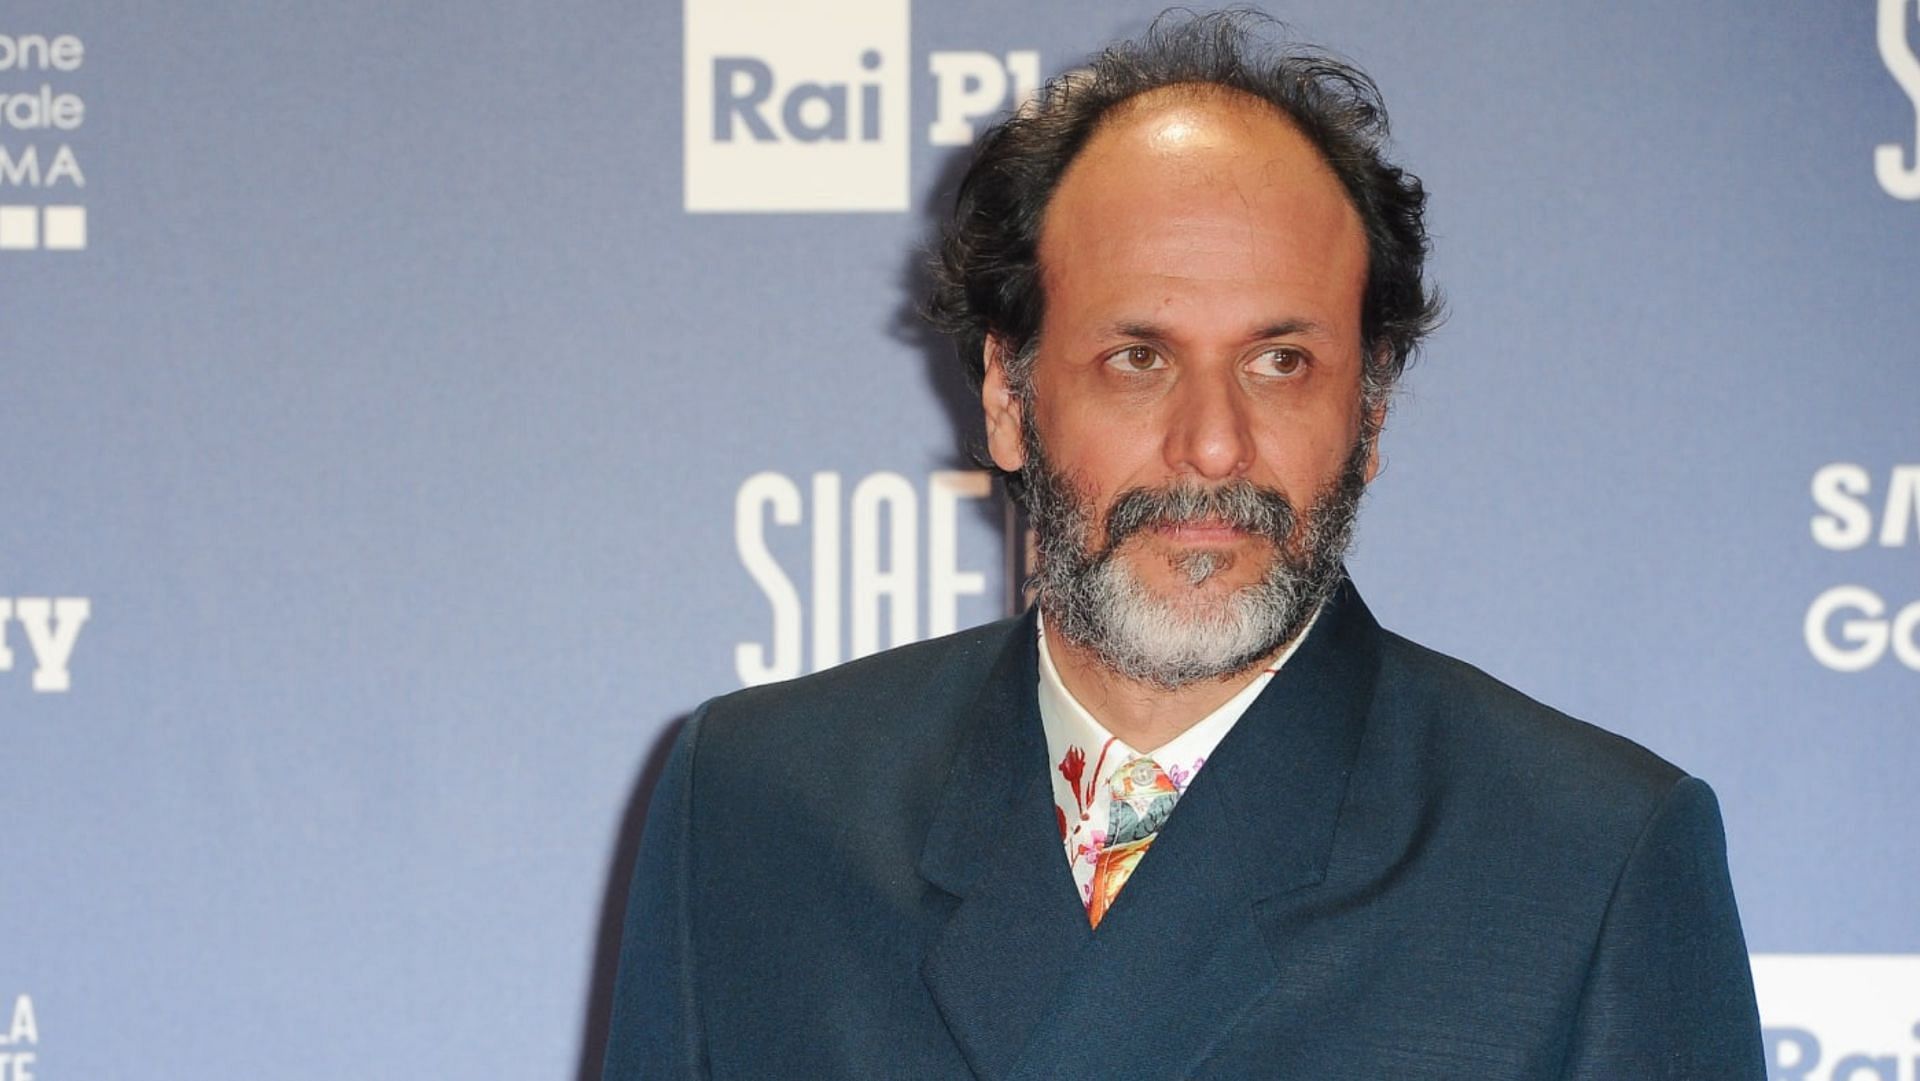 Luca Guadagnino directed Timothee Chalamet and Armie Hammer in Call Me By Your Name. (Image via Mondadori Portfolio/Getty)